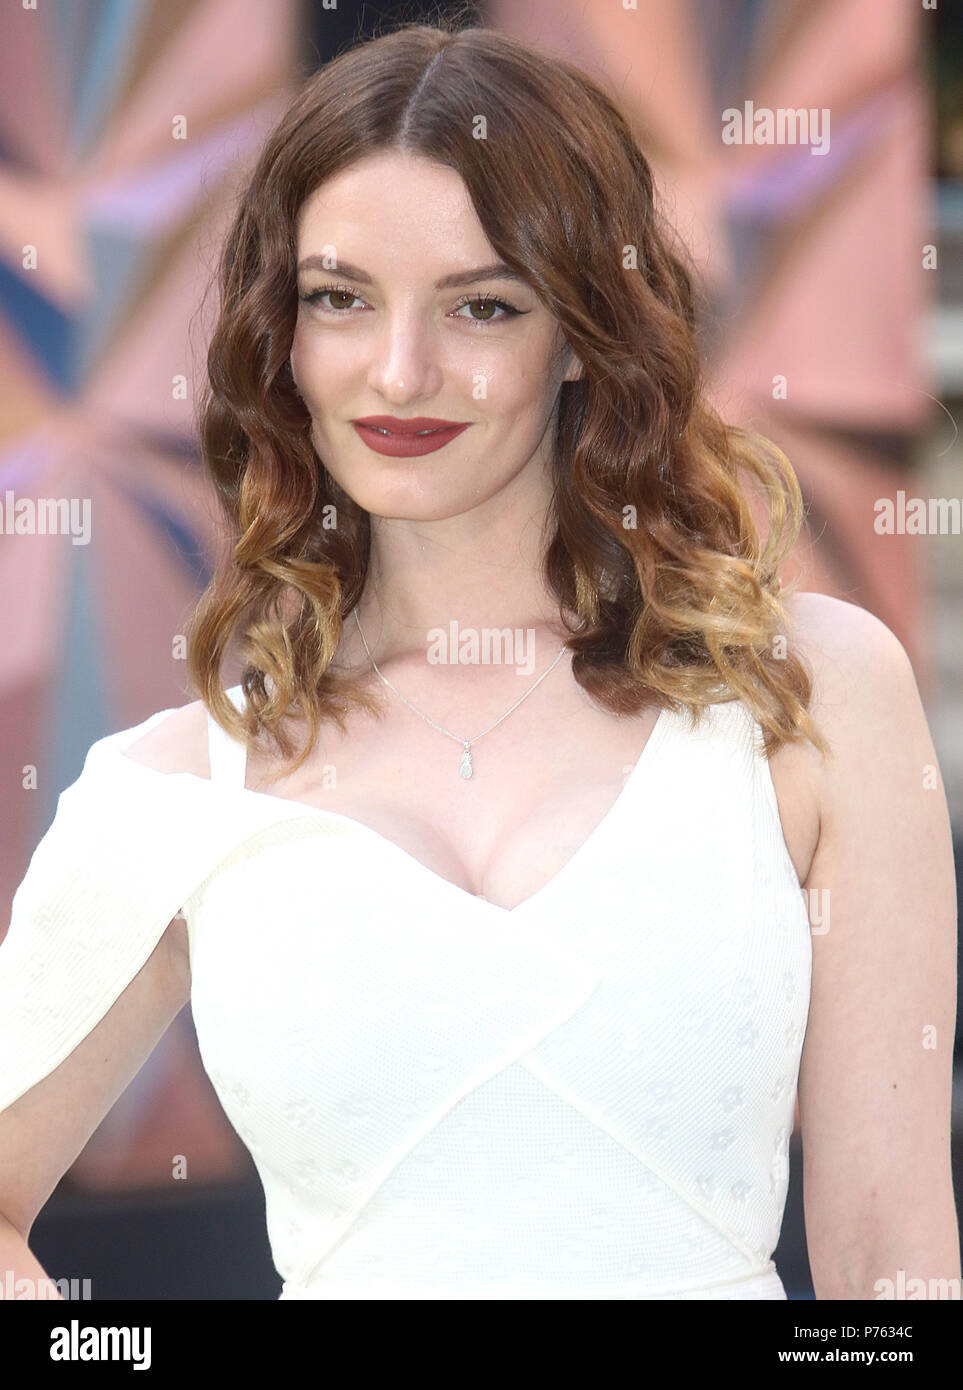 Jun 06, 2018 - Dakota Blue Richards attending Royal Academy Of Arts 250th Summer Exhibition Preview Party at Burlington House in London, England, UK Stock Photo